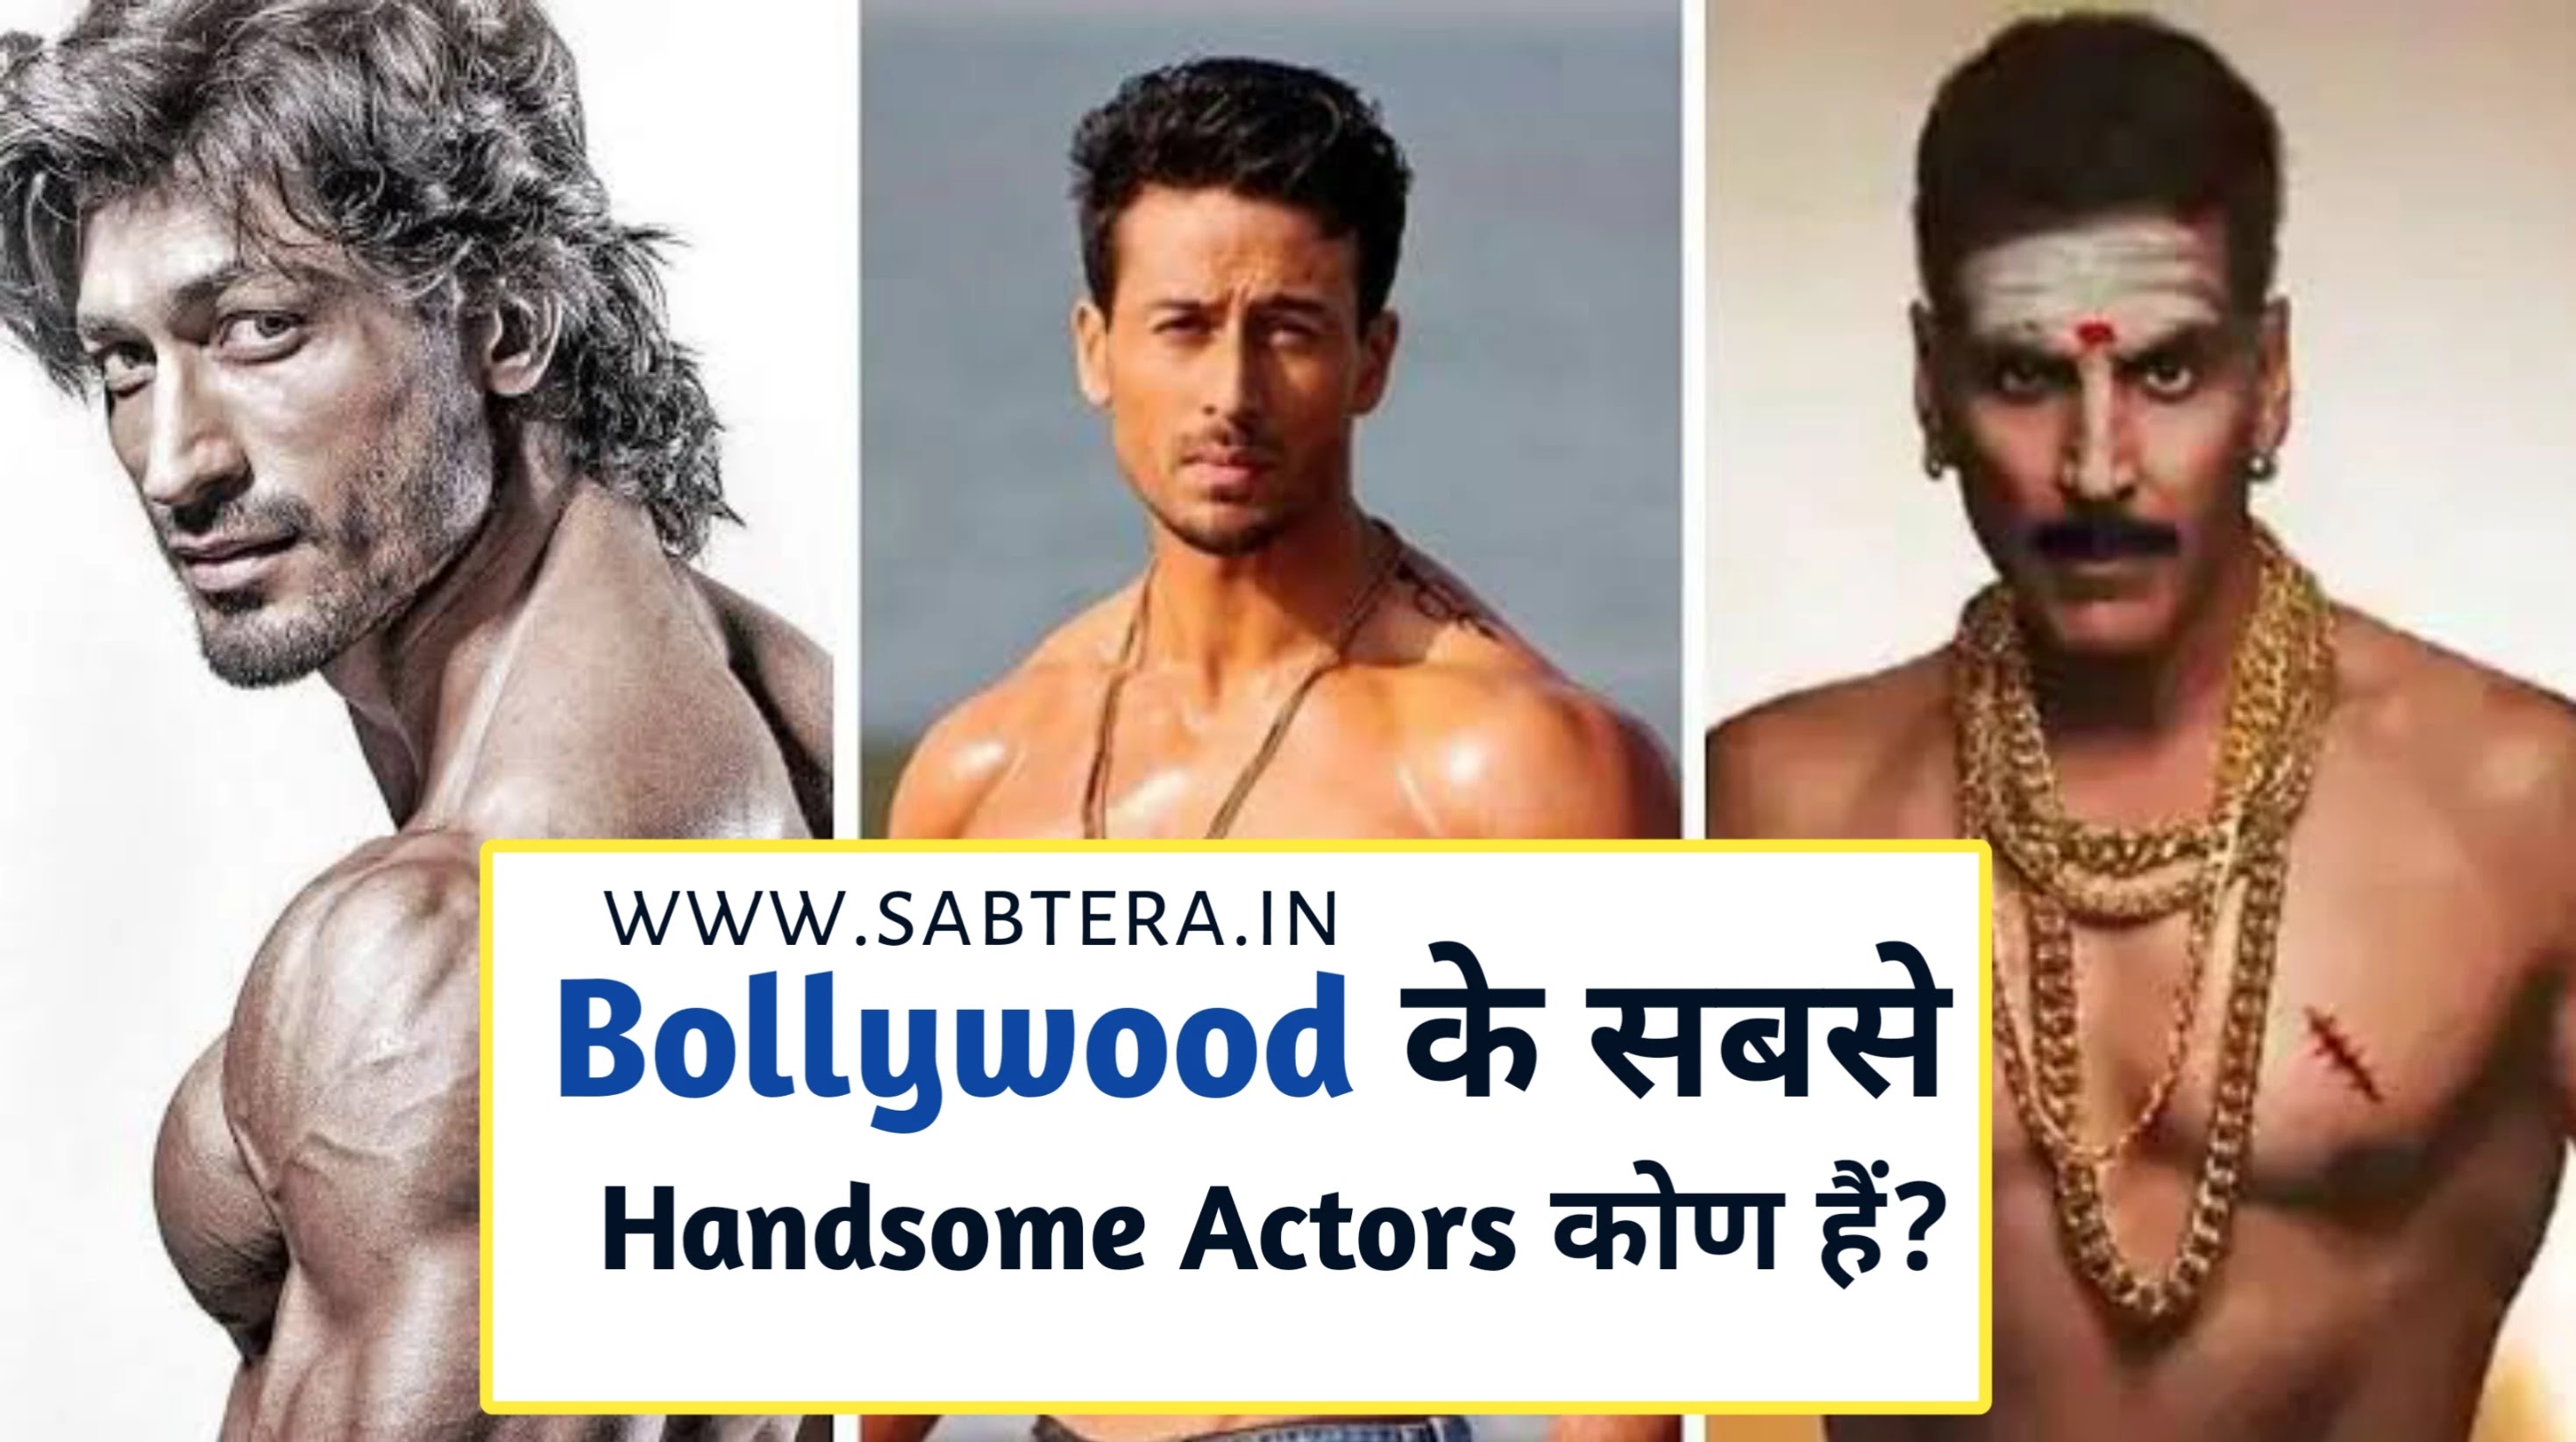 Bollywood Handsome Actors in Hindi